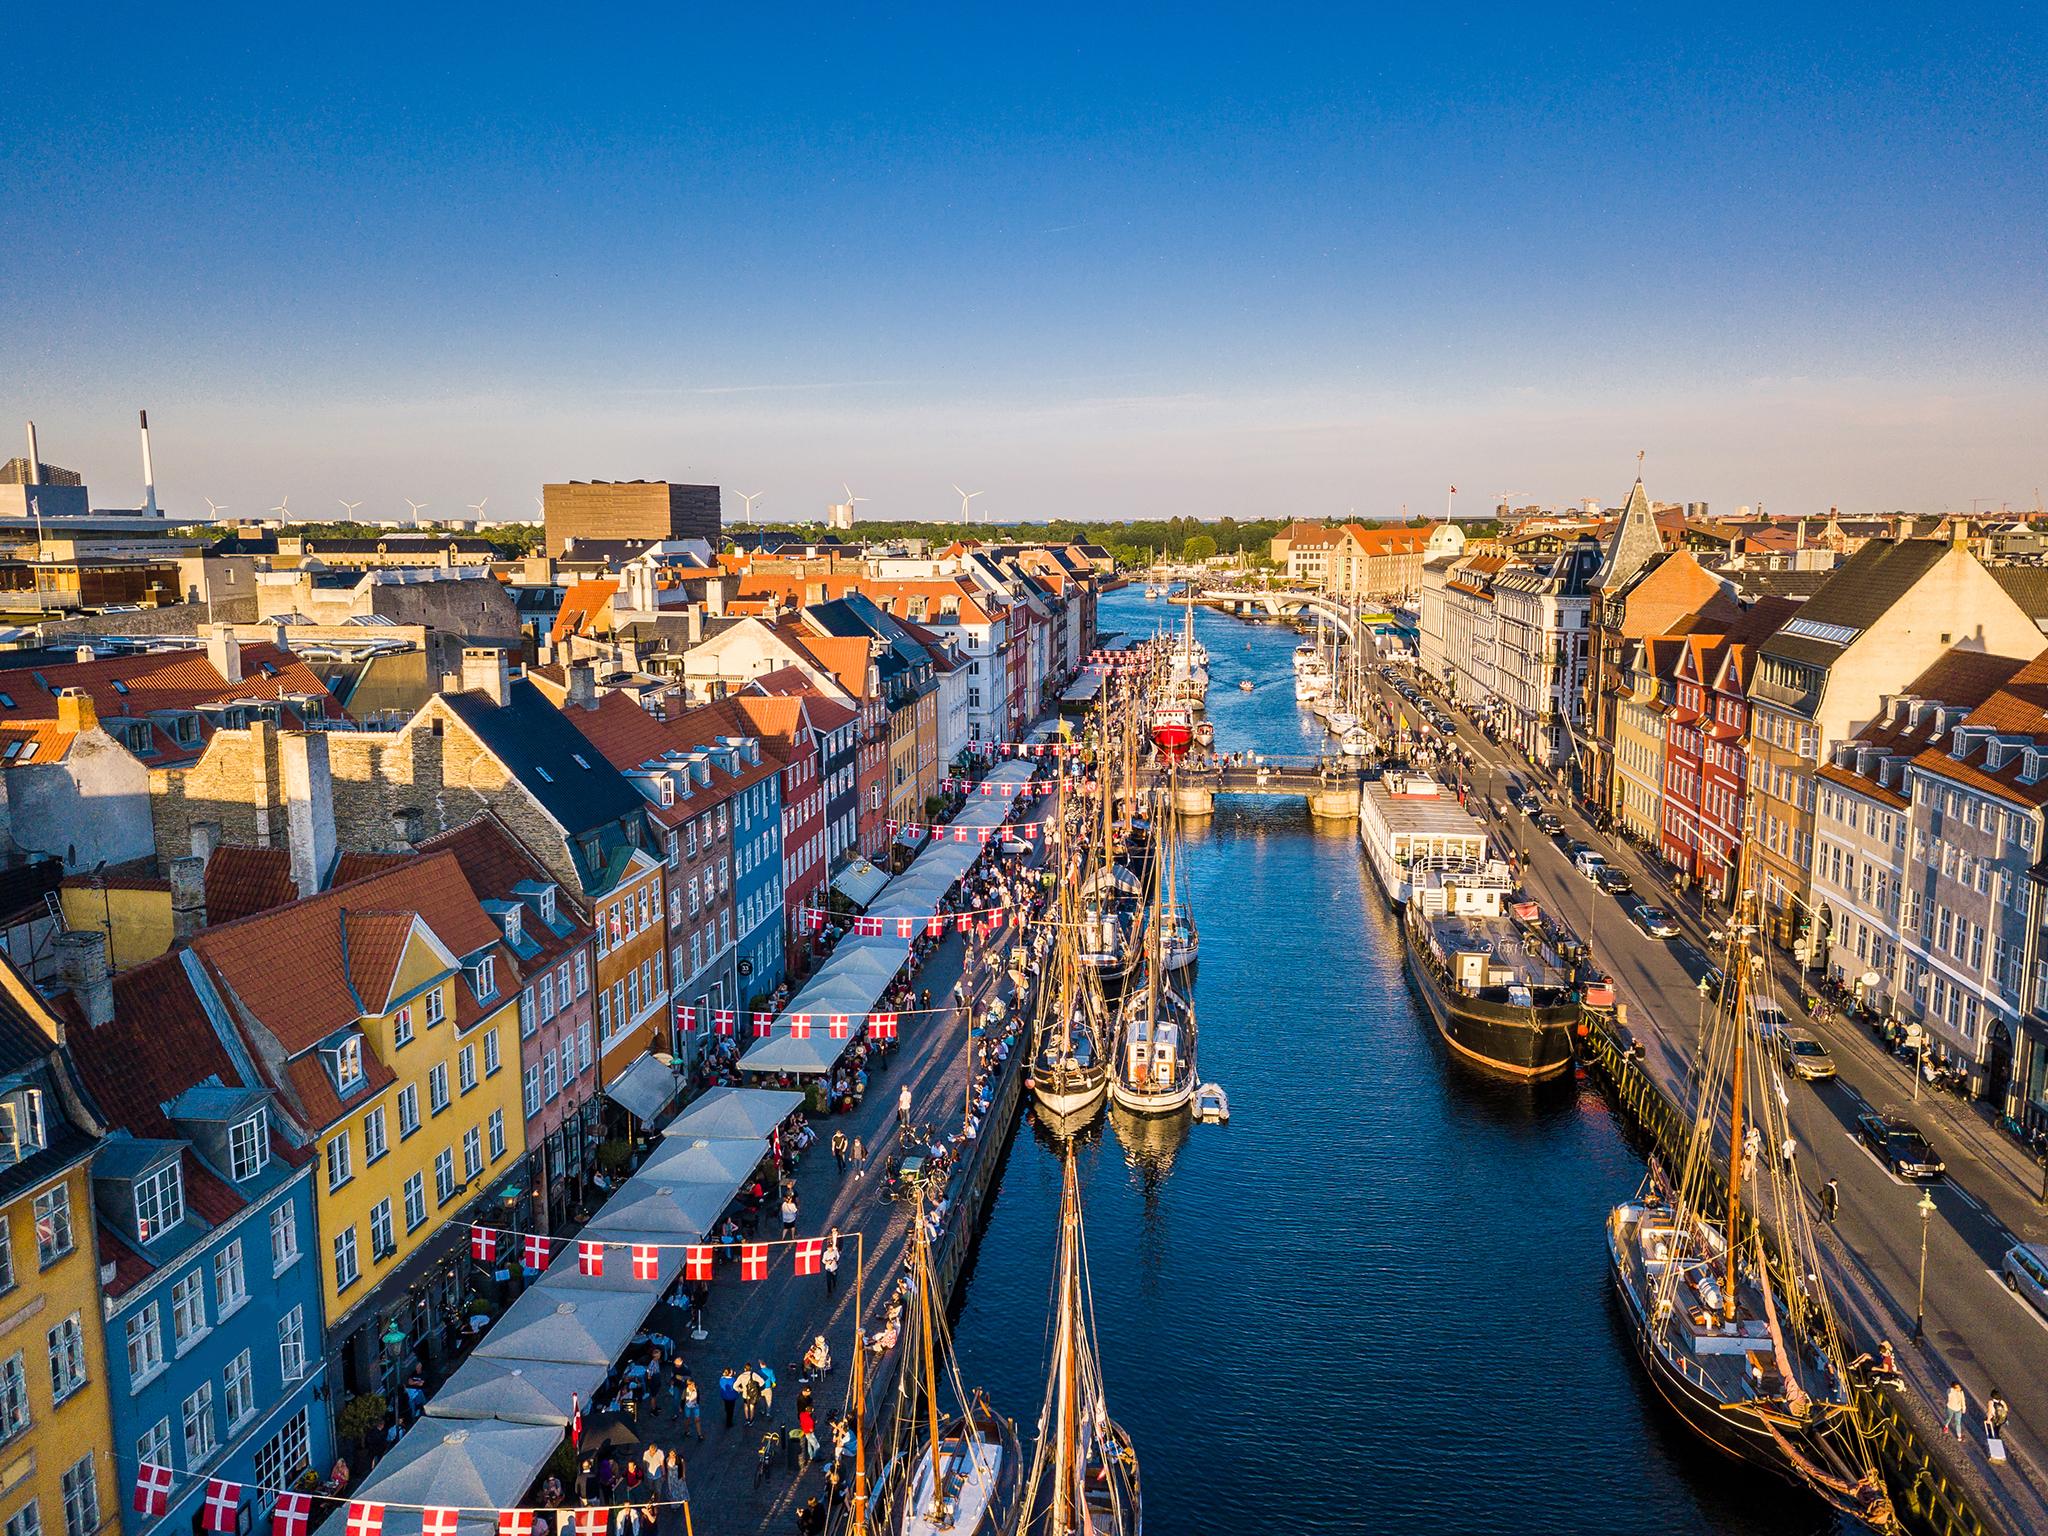 Copenhagen is putting sustainability at the top of its agenda